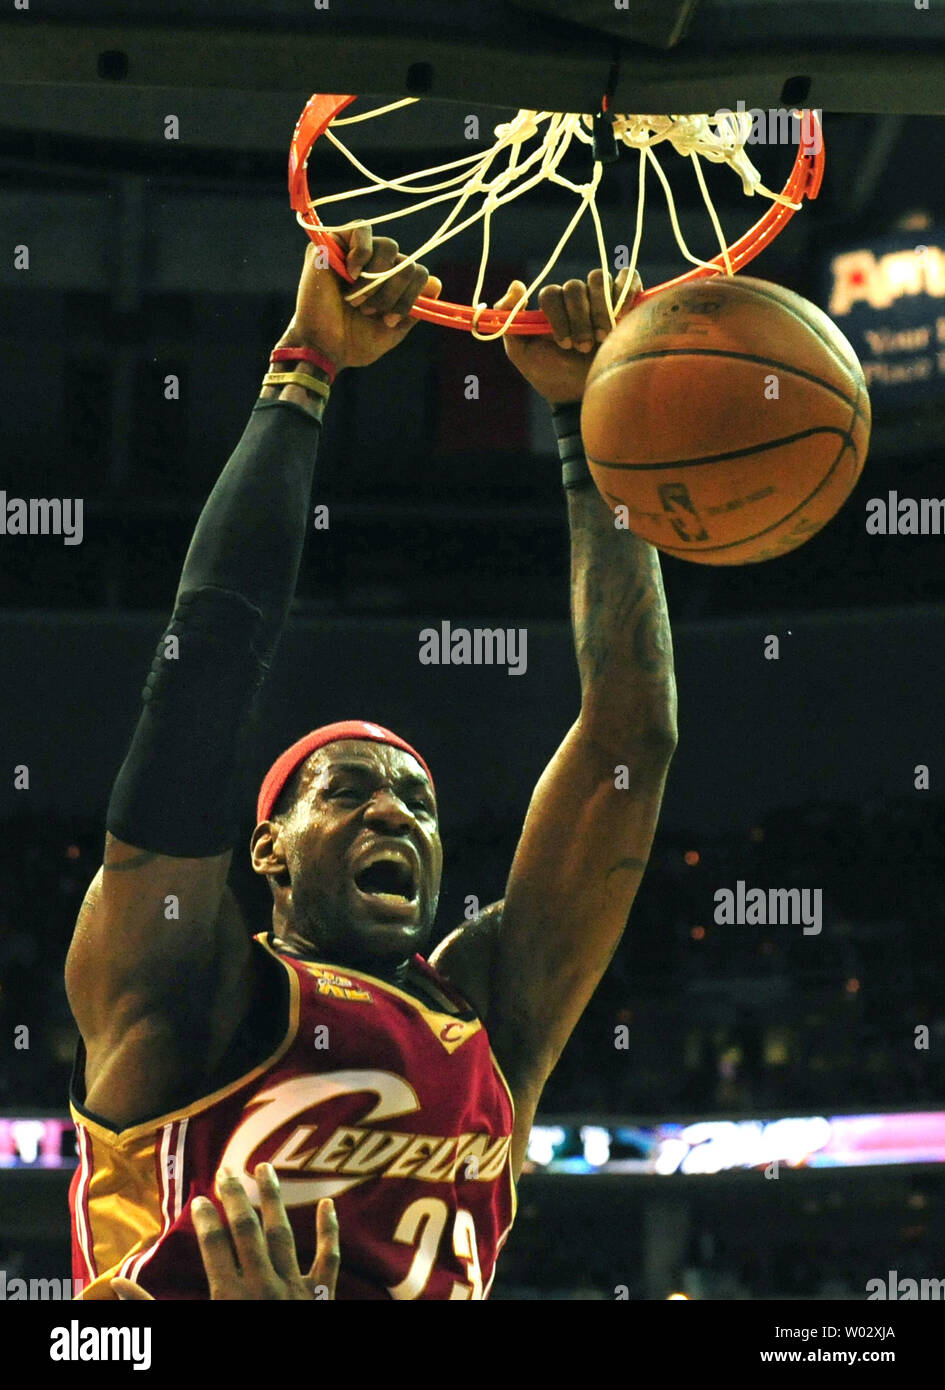 Cleveland Cavaliers' LeBron James dunks the ball against the Washington Wizards at the Verizon Center in Washington on November 18, 2009. UPI/Kevin Dietsch Stock Photo